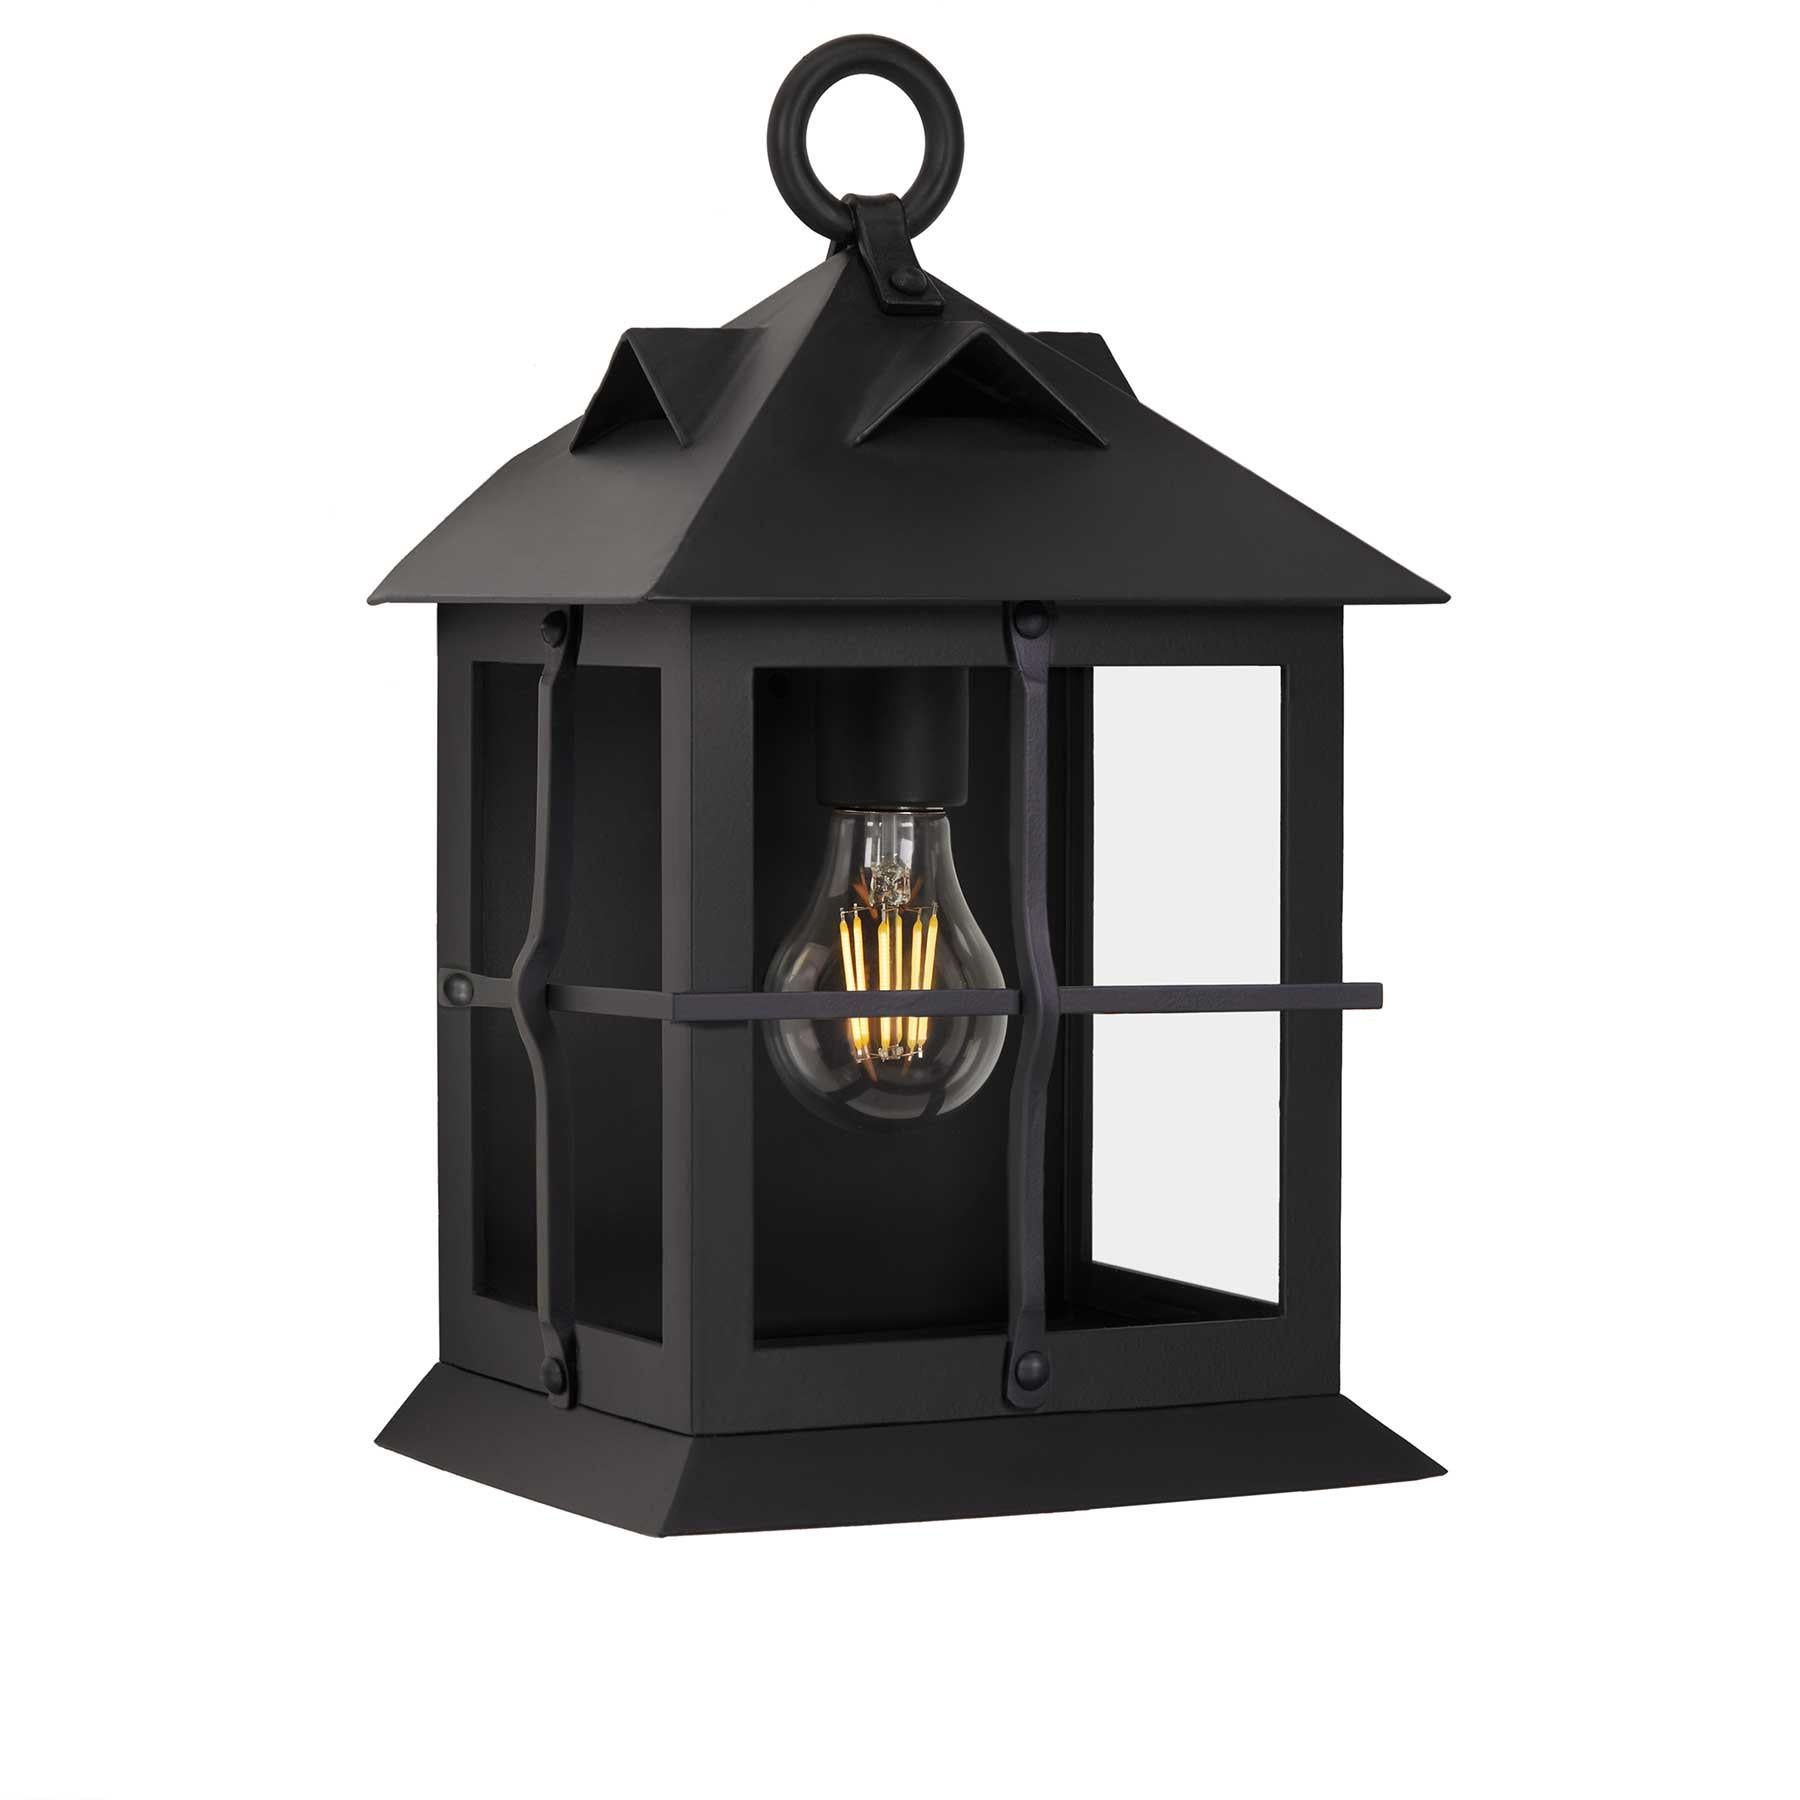 This lantern's balanced proportions perfectly blend the Spanish Colonial Revival and Craftsman movements, both popular in the early 1900s. Simple yet elegant, this lantern embodies the sturdy structuring of the Craftsman cottage, mimicking the